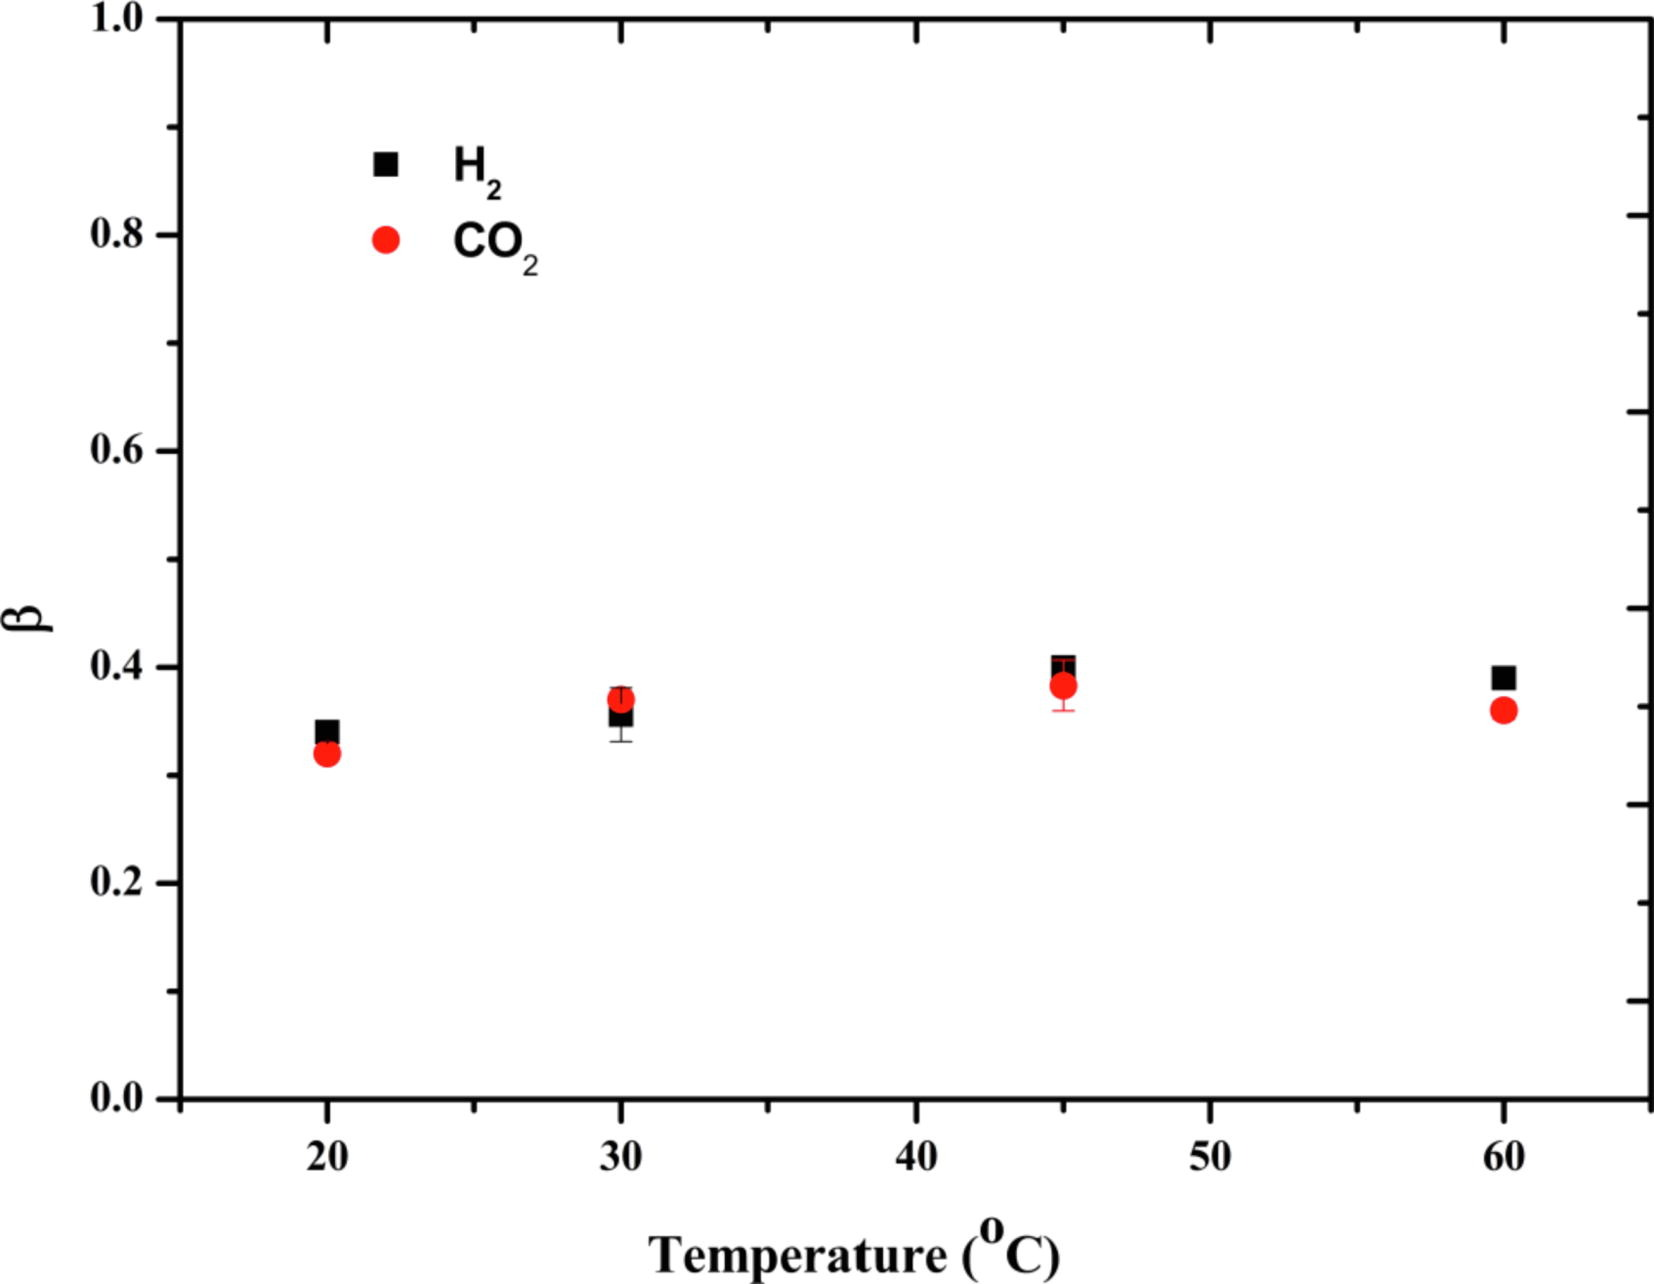 ß values for H2 and CO2 tests at different temperatures.